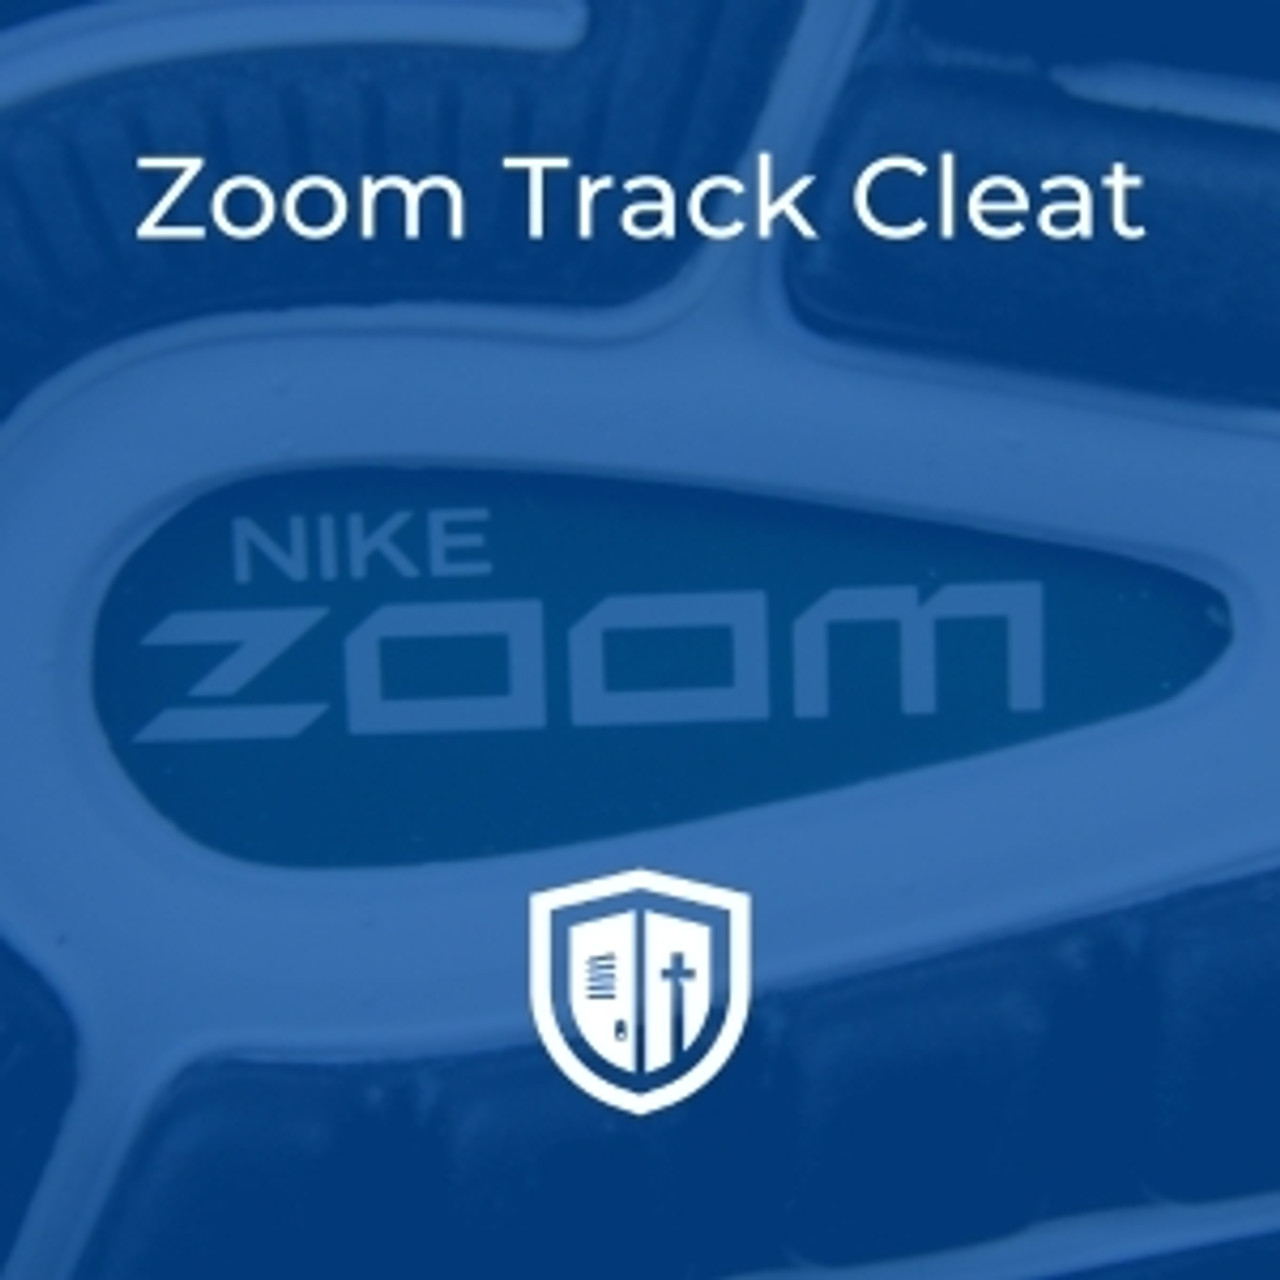 Track Cleat